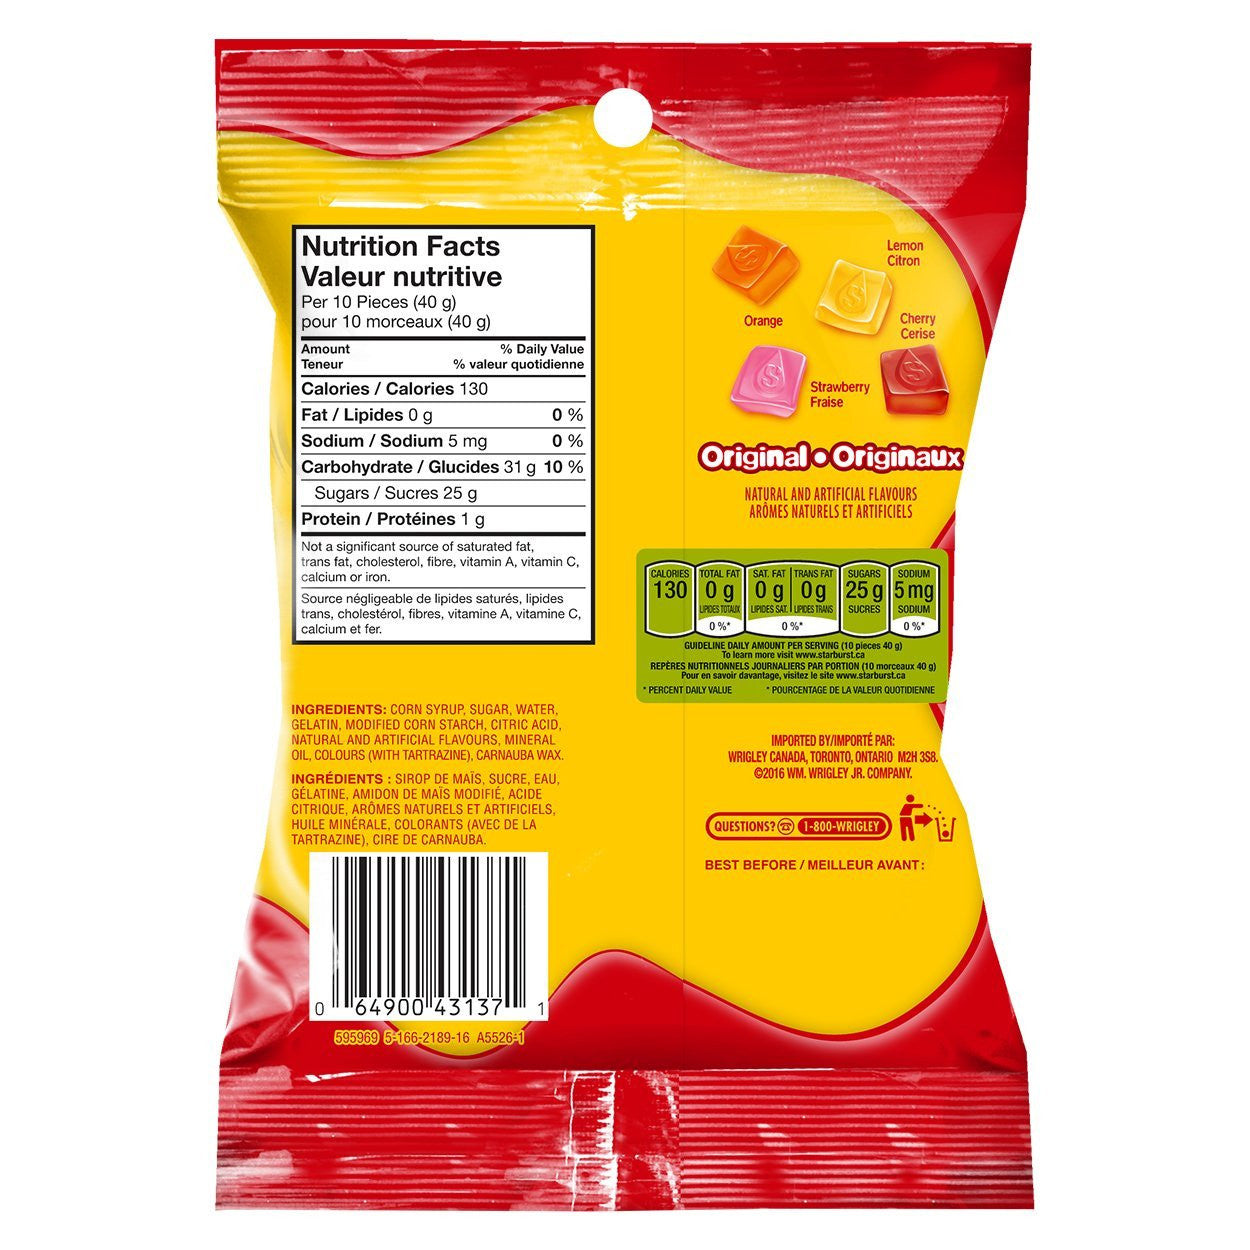 Starburst Gummies Original Candy, 164g/5.8oz, (Imported from Canada)